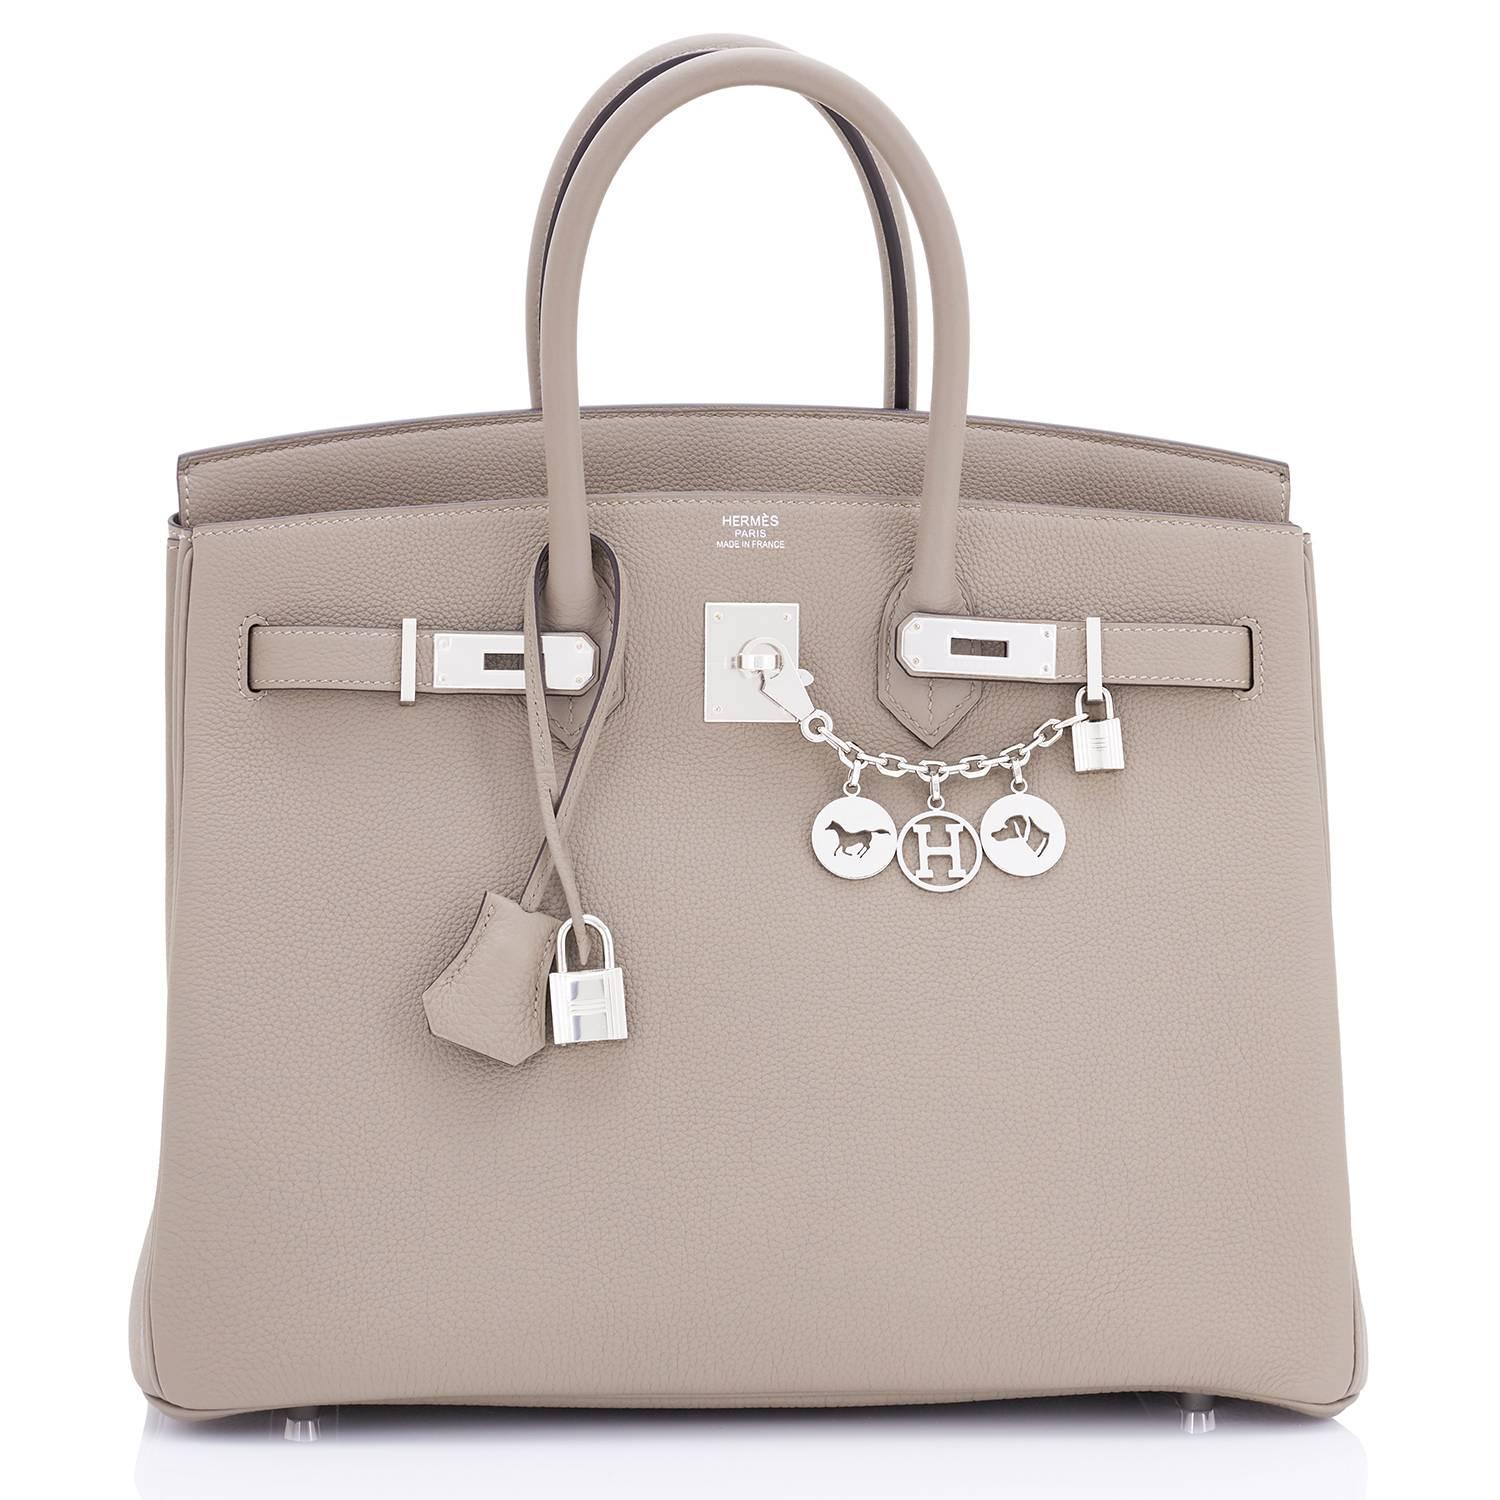 Hermes Birkin 35 Gris Asphalte Dove Grey Togo Palladium Bag
Devastatingly gorgeous!  
Gris Asphalte is the best neutral to come from Hermes in many years.
Brand New in Box. Store fresh. Pristine Condition (with plastic on hardware). 
Perfect gift!